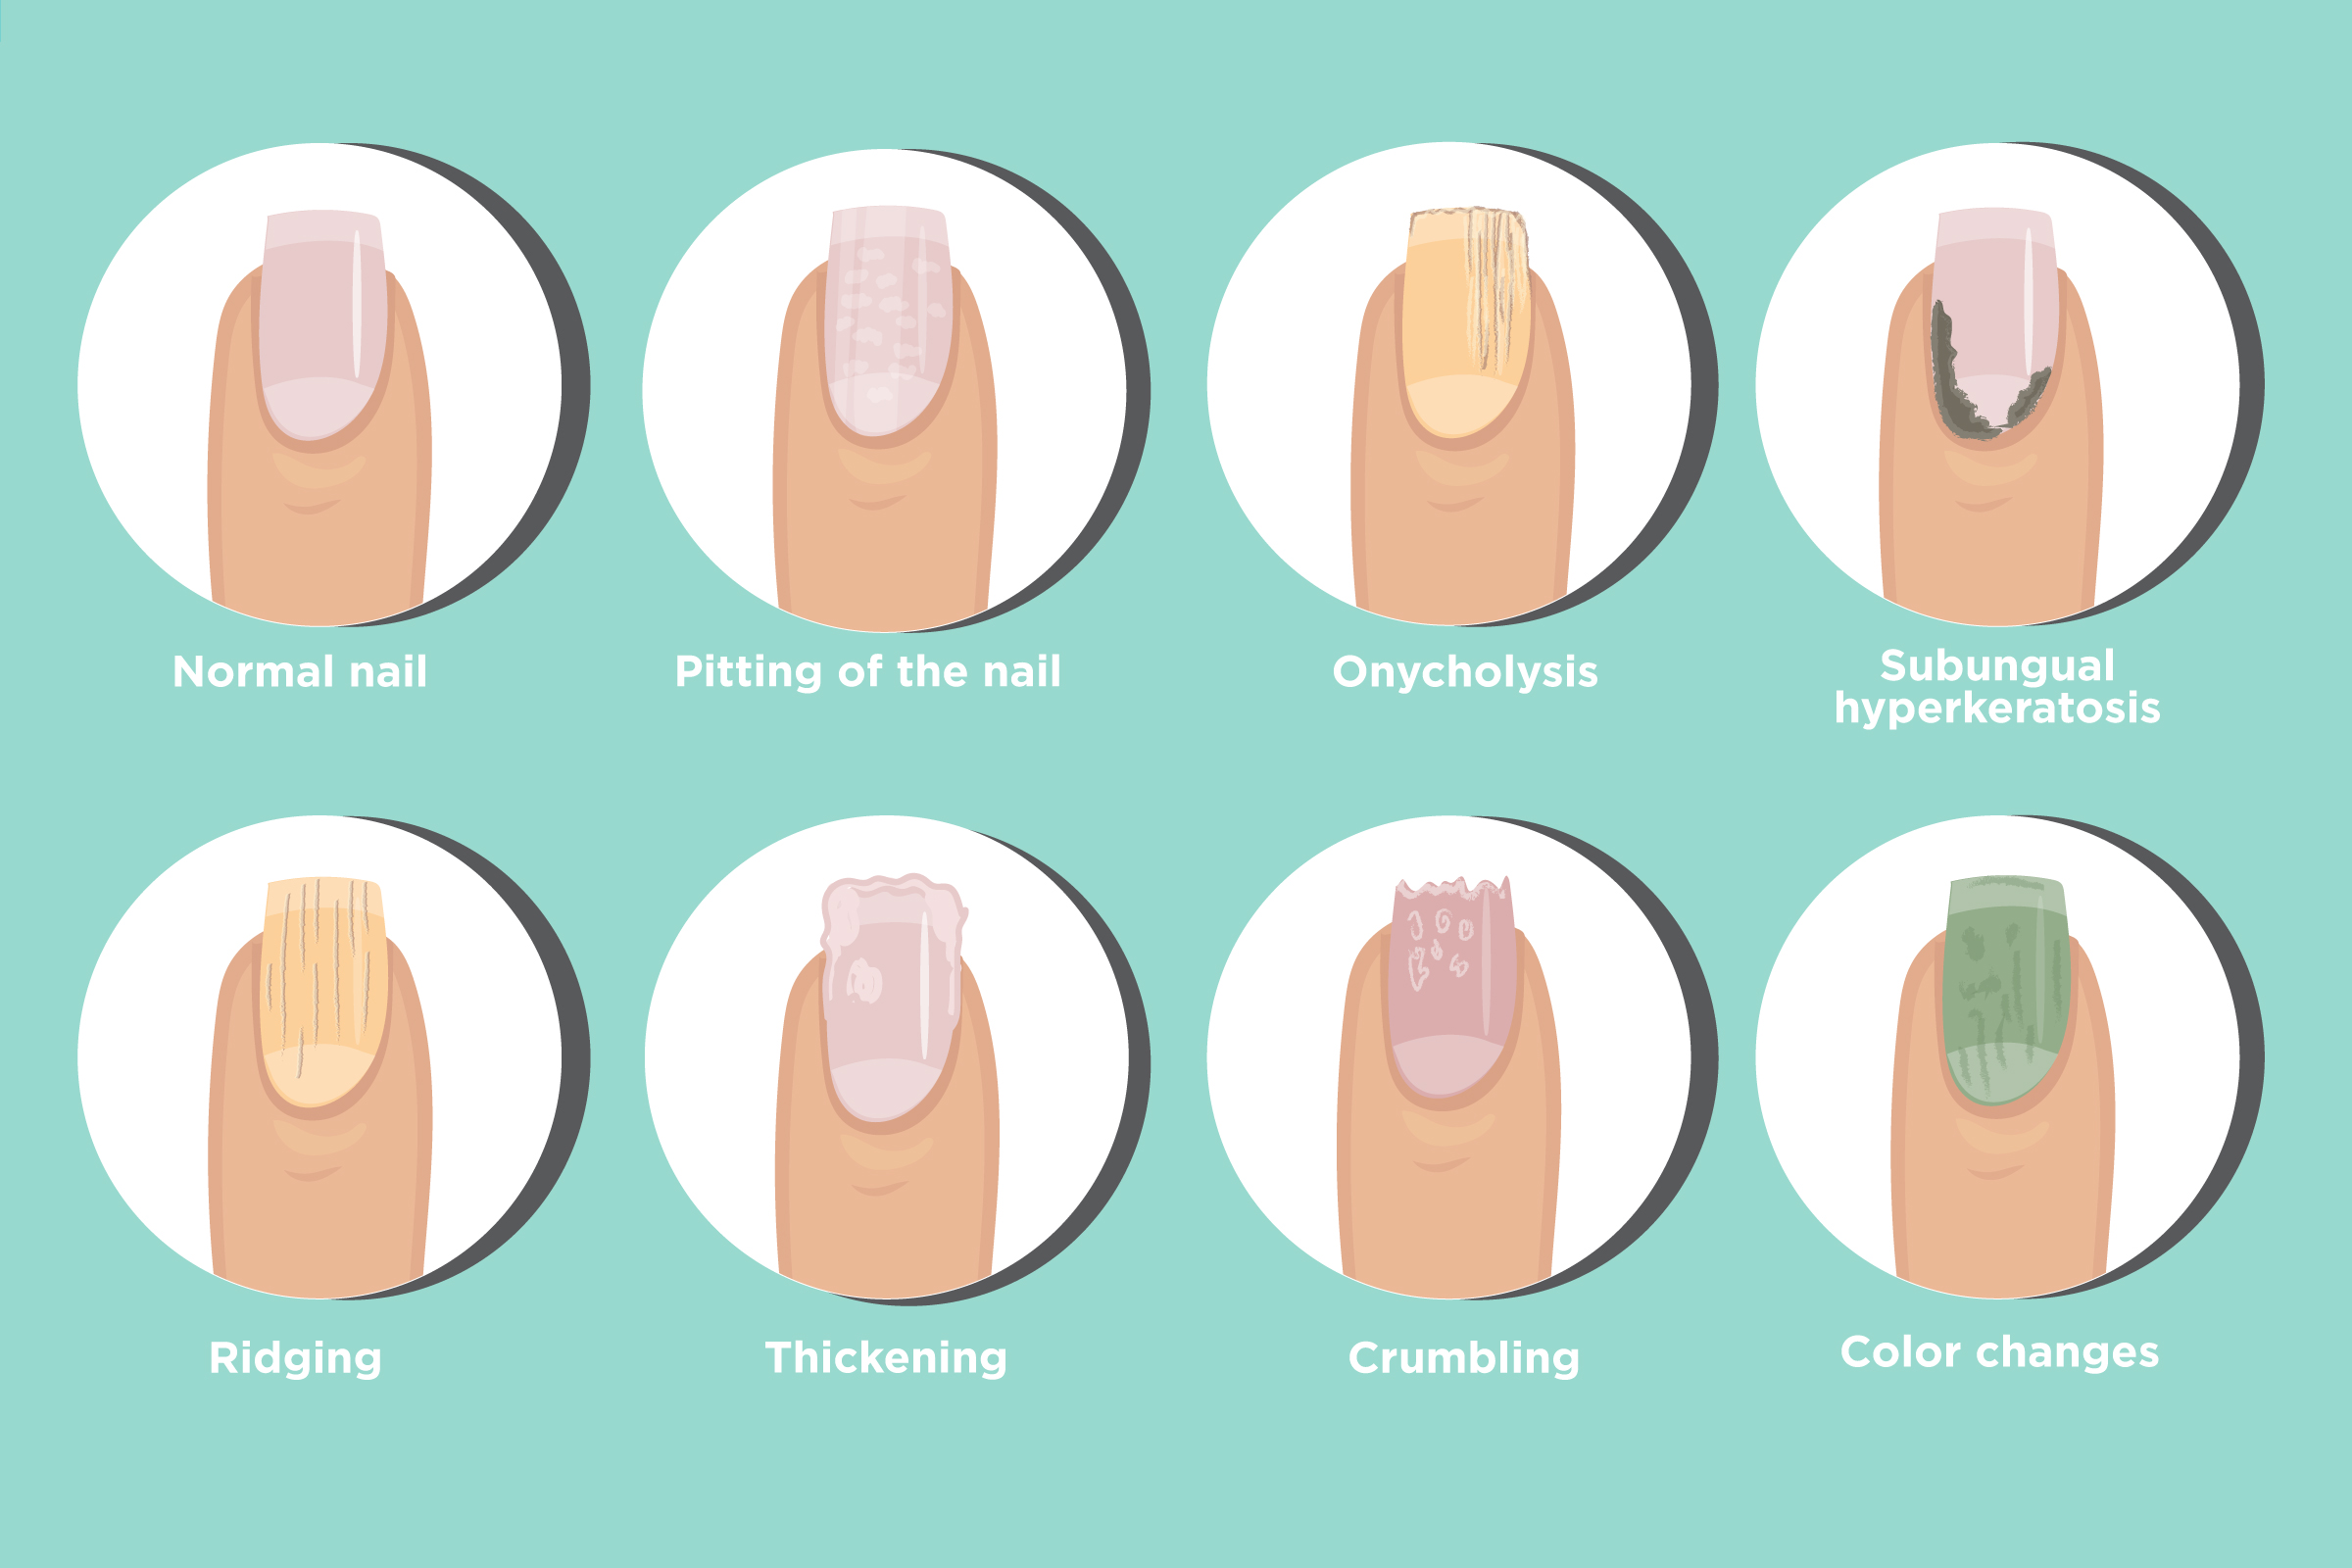 5. How to Prevent Foot Nail Color Changes - wide 4